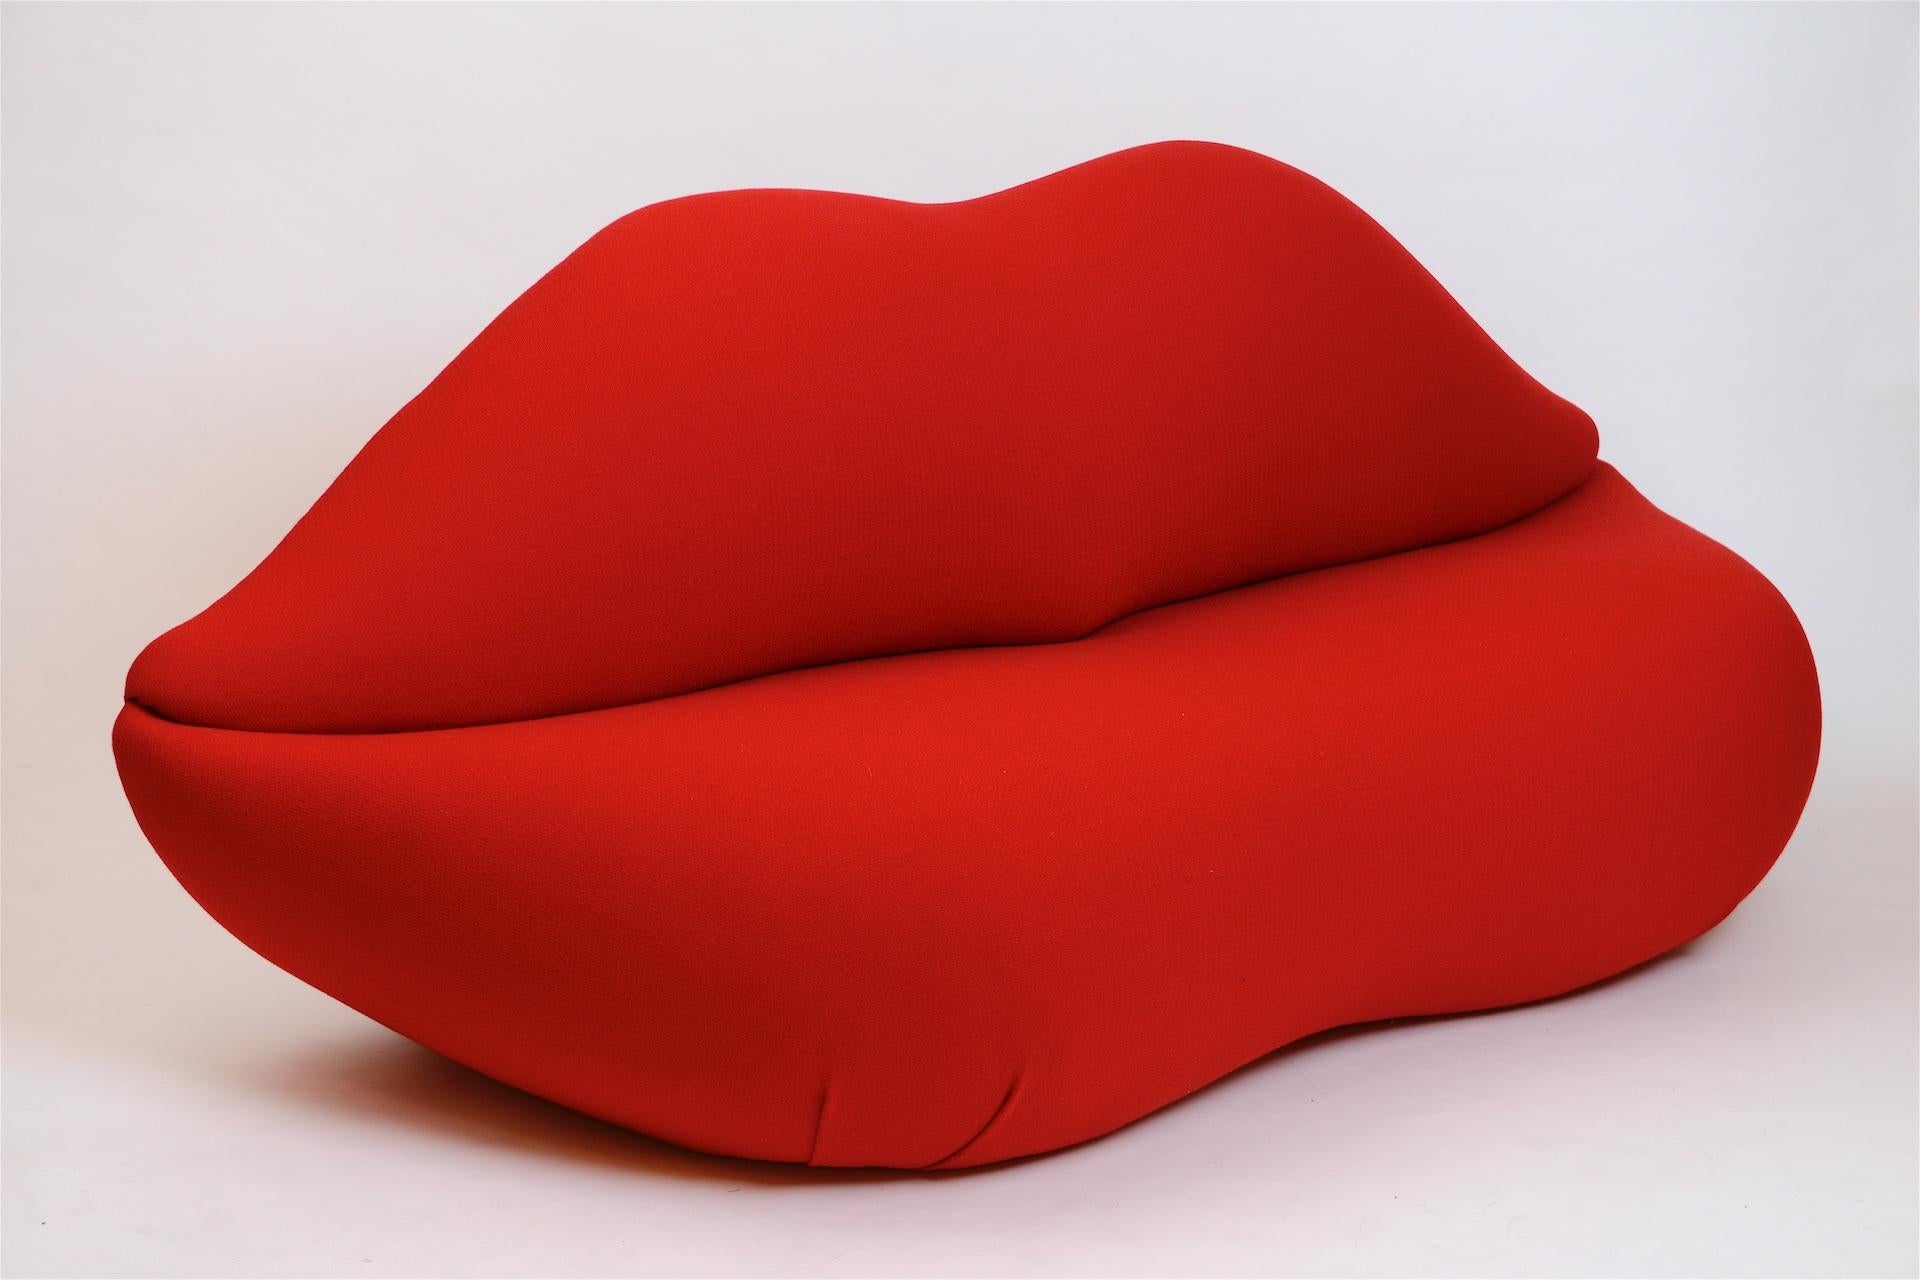 Re upholstered original 1970s 'Bocca' lips sofa. Based on the lips of Marilyn Monroe created as a tribute to Dalí by Studio 65 for Gufram, Italy, circa 1972.

This sofa has been re upholstered in Knoll mohair and wool fabric.

The original